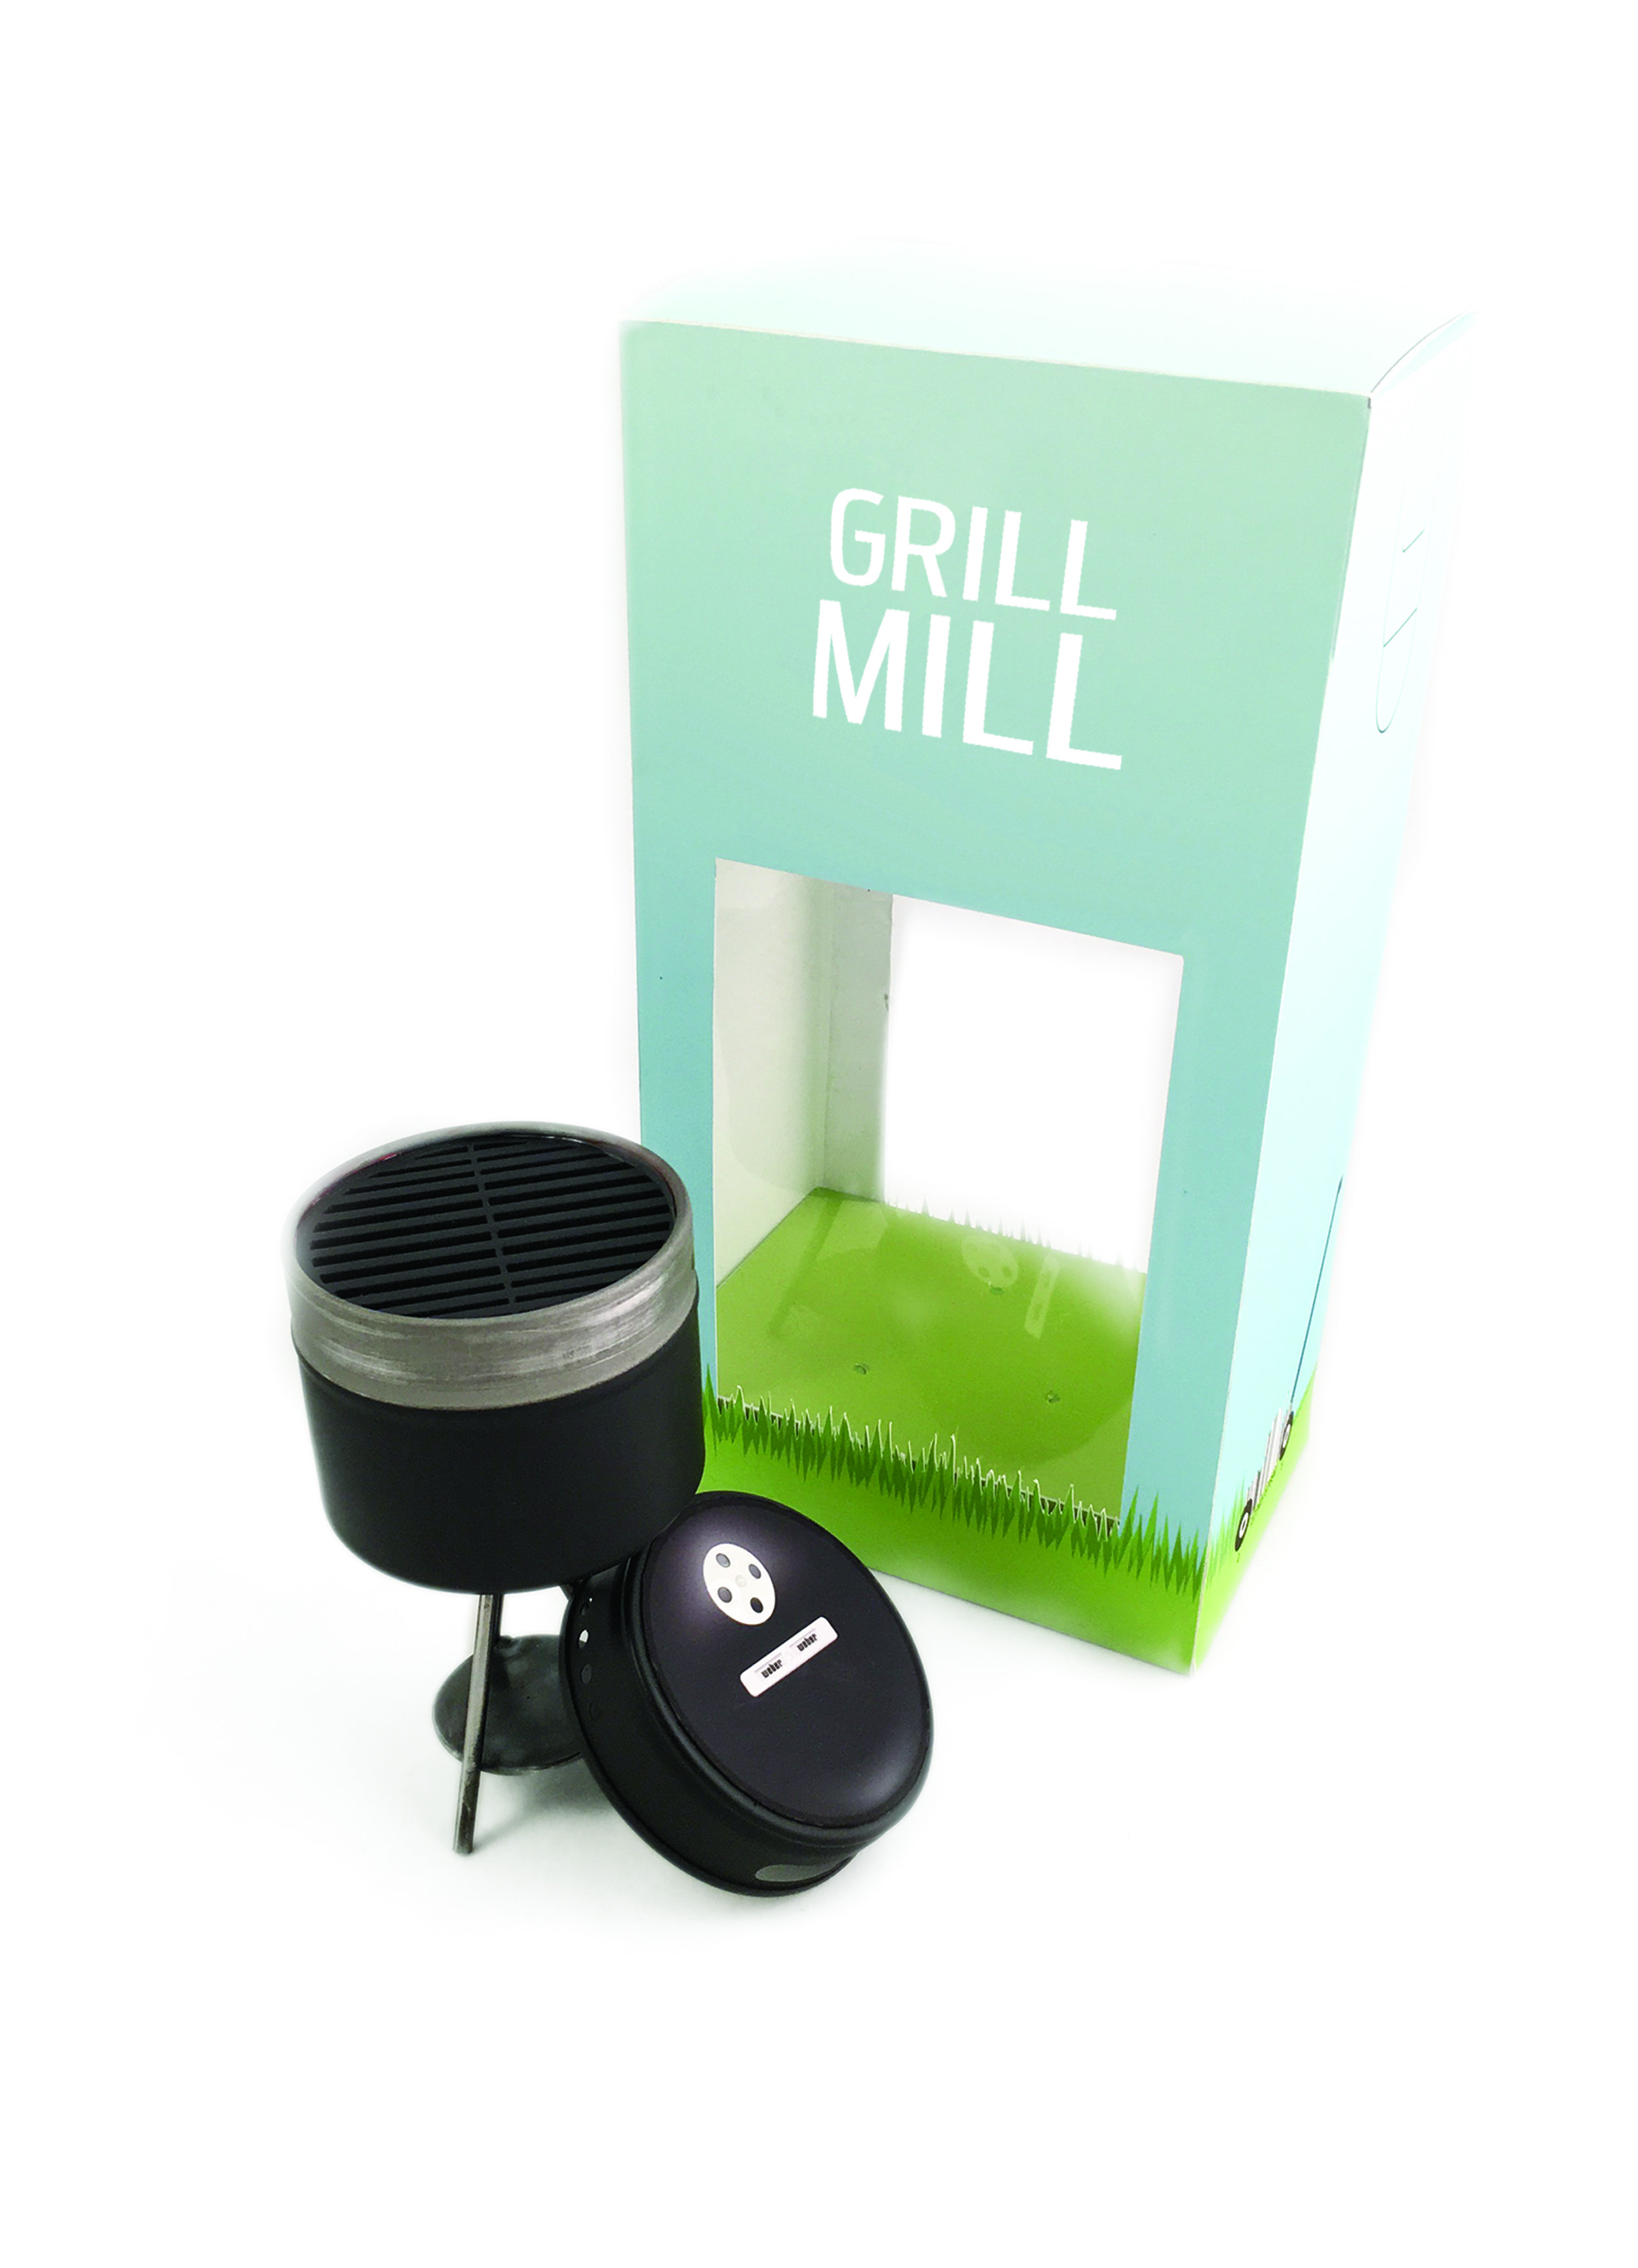 Anderson_Grill_grill-mill_packaging.jpg